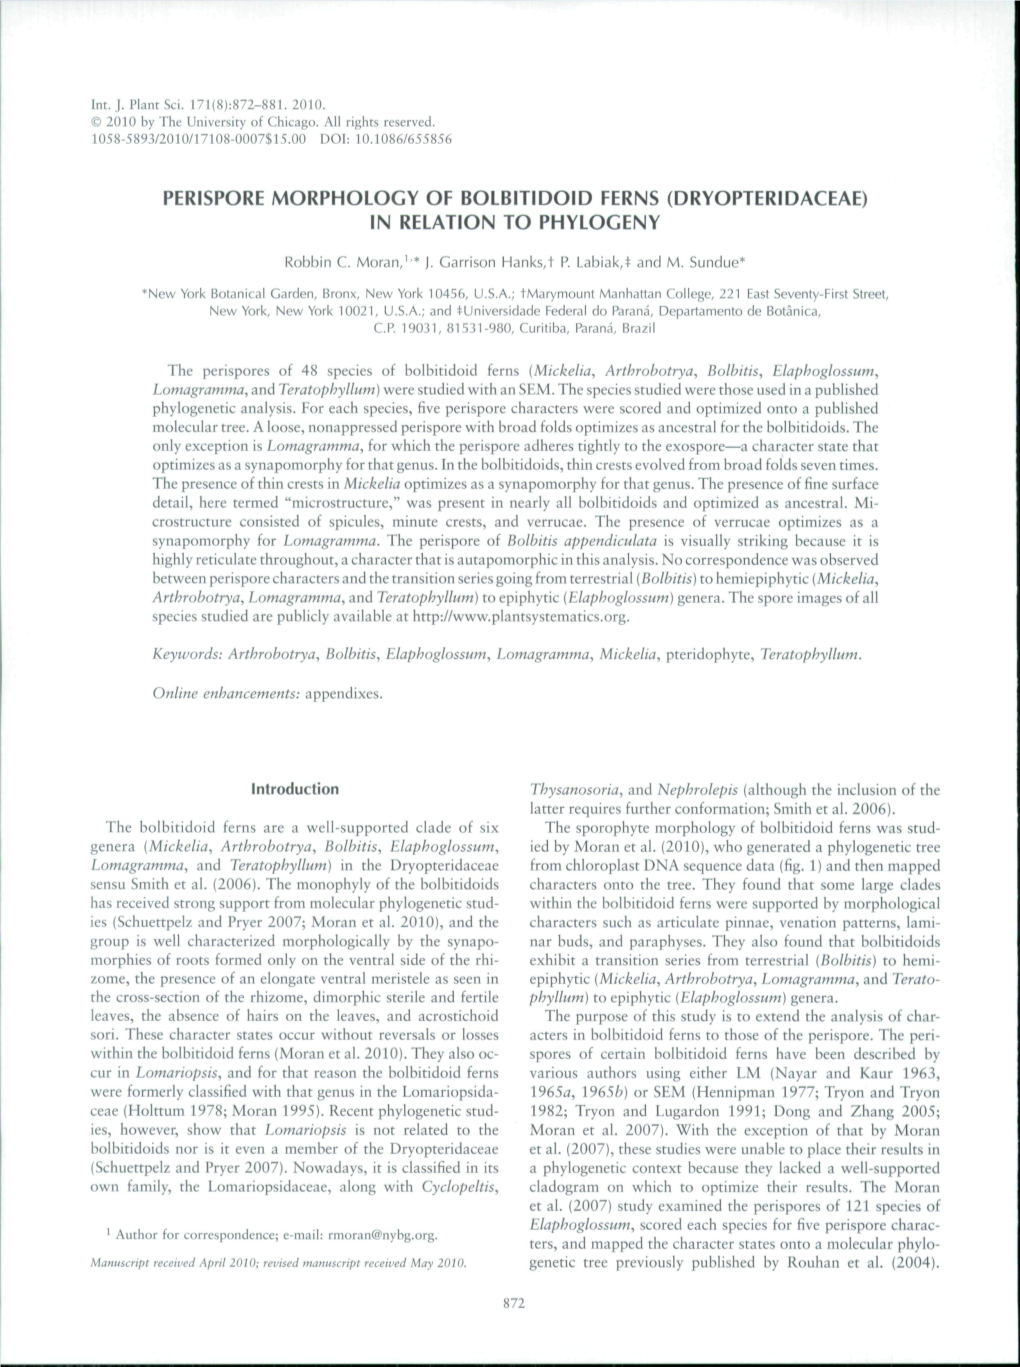 Perispore Morphology of Bolbitidoid Ferns (Dryopteridaceae) in Relation to Phylogeny